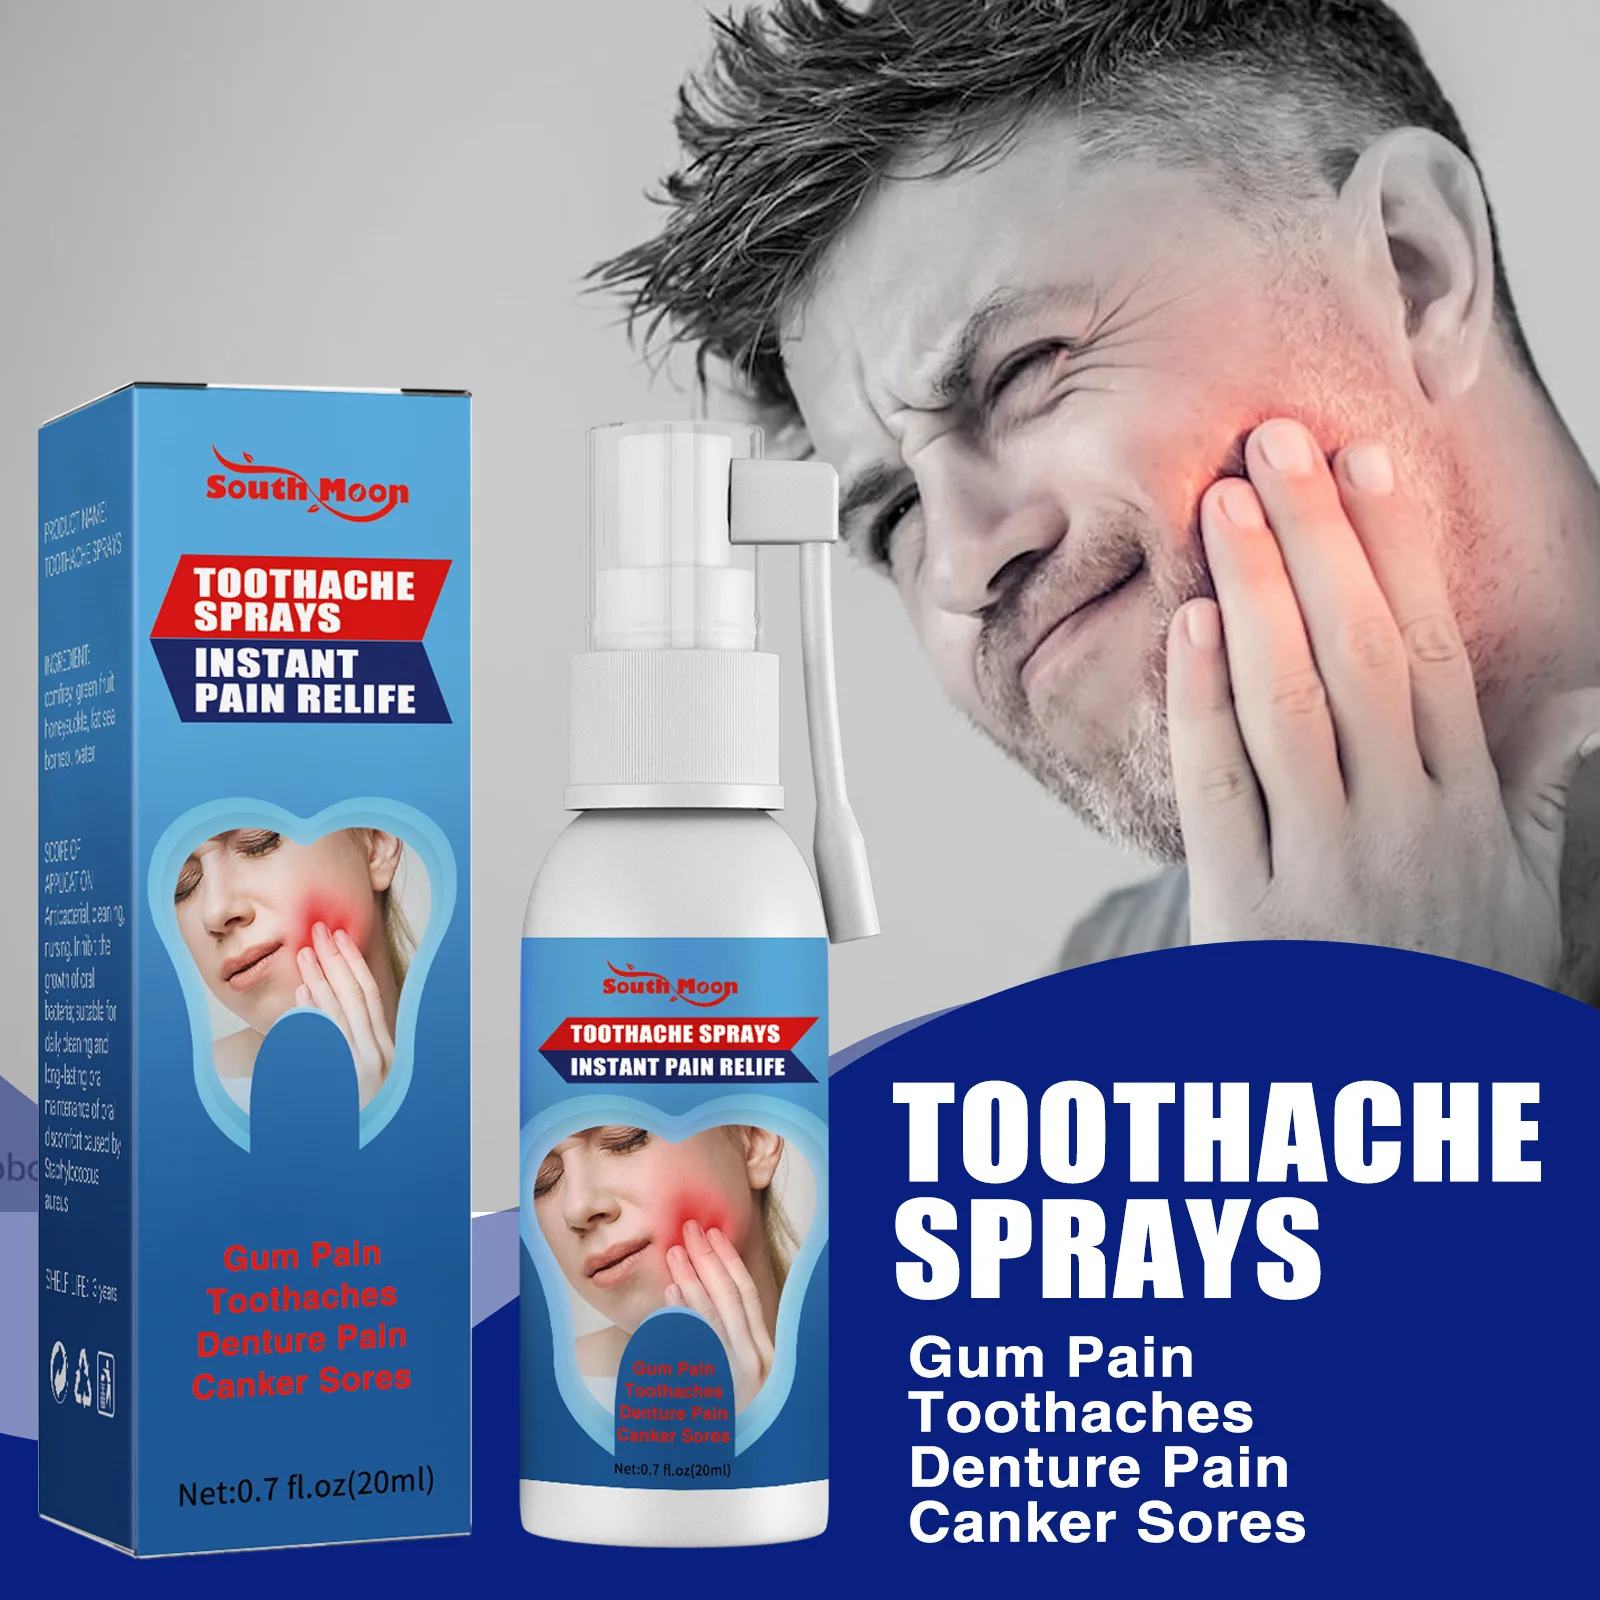 

South Moon Toothache Spray Swelling And Aching Of Gum Toothache Getting Angry Dental Cavity Toothache Stop Tooth Decay